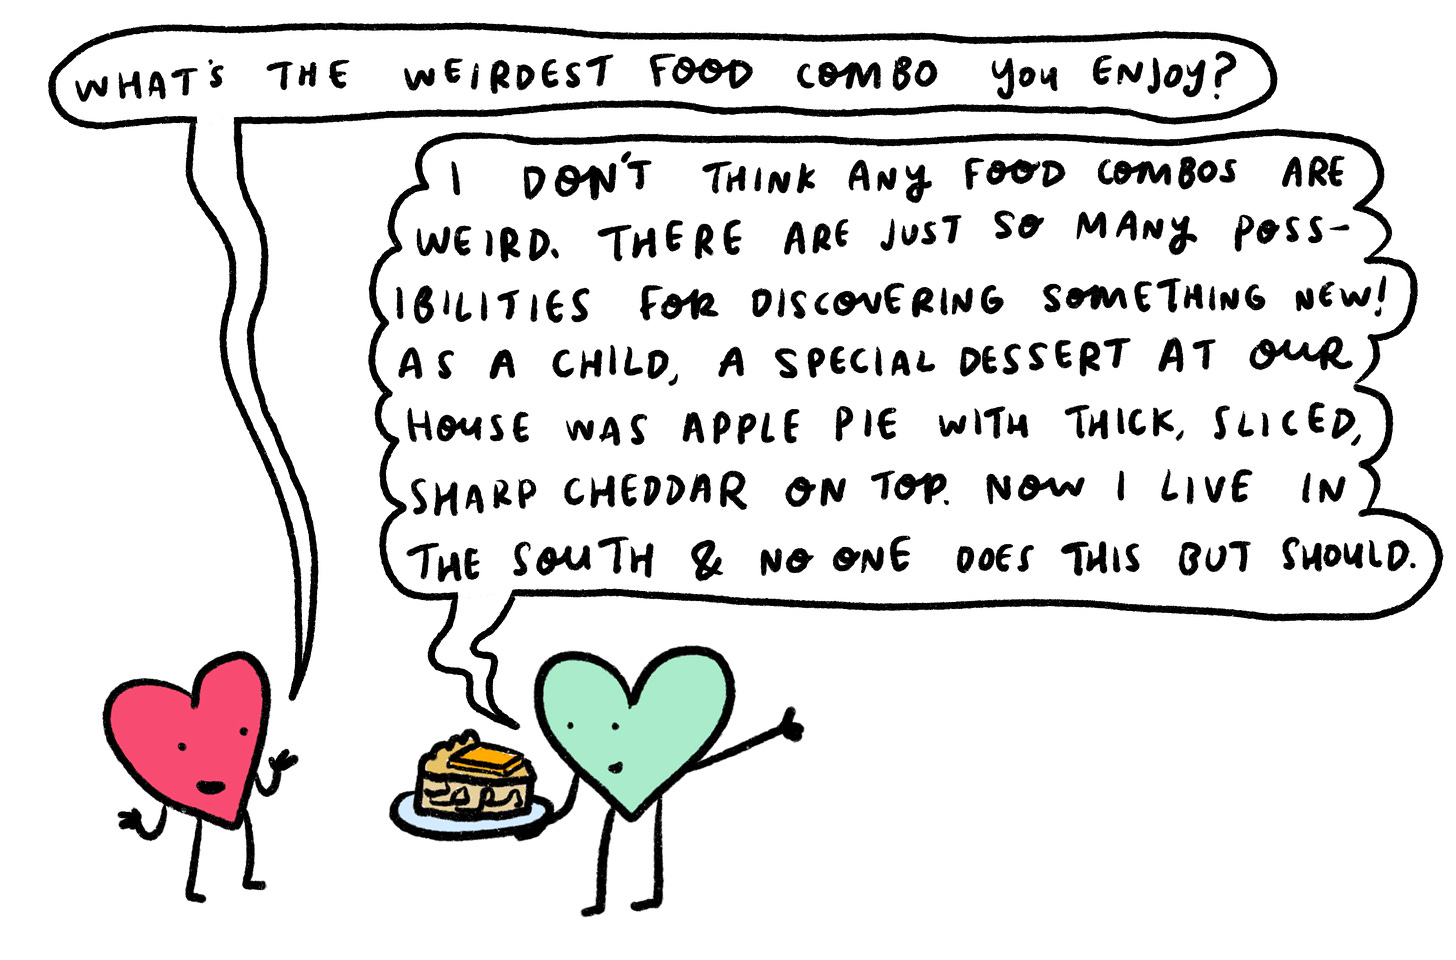 A q+a style illustration that reads: What’s the weirdest food combo you enjoy? I don’t think any food combos are weird. There are lots of foods I don’t eat, but I don’t think combining any flavors is goofy or strange. There are just so many possibilities for discovering something new! As a child, a special dessert at our house was apple pie with thick sliced sharp cheddar on top. Now I live in the south and no one does this but they should. 